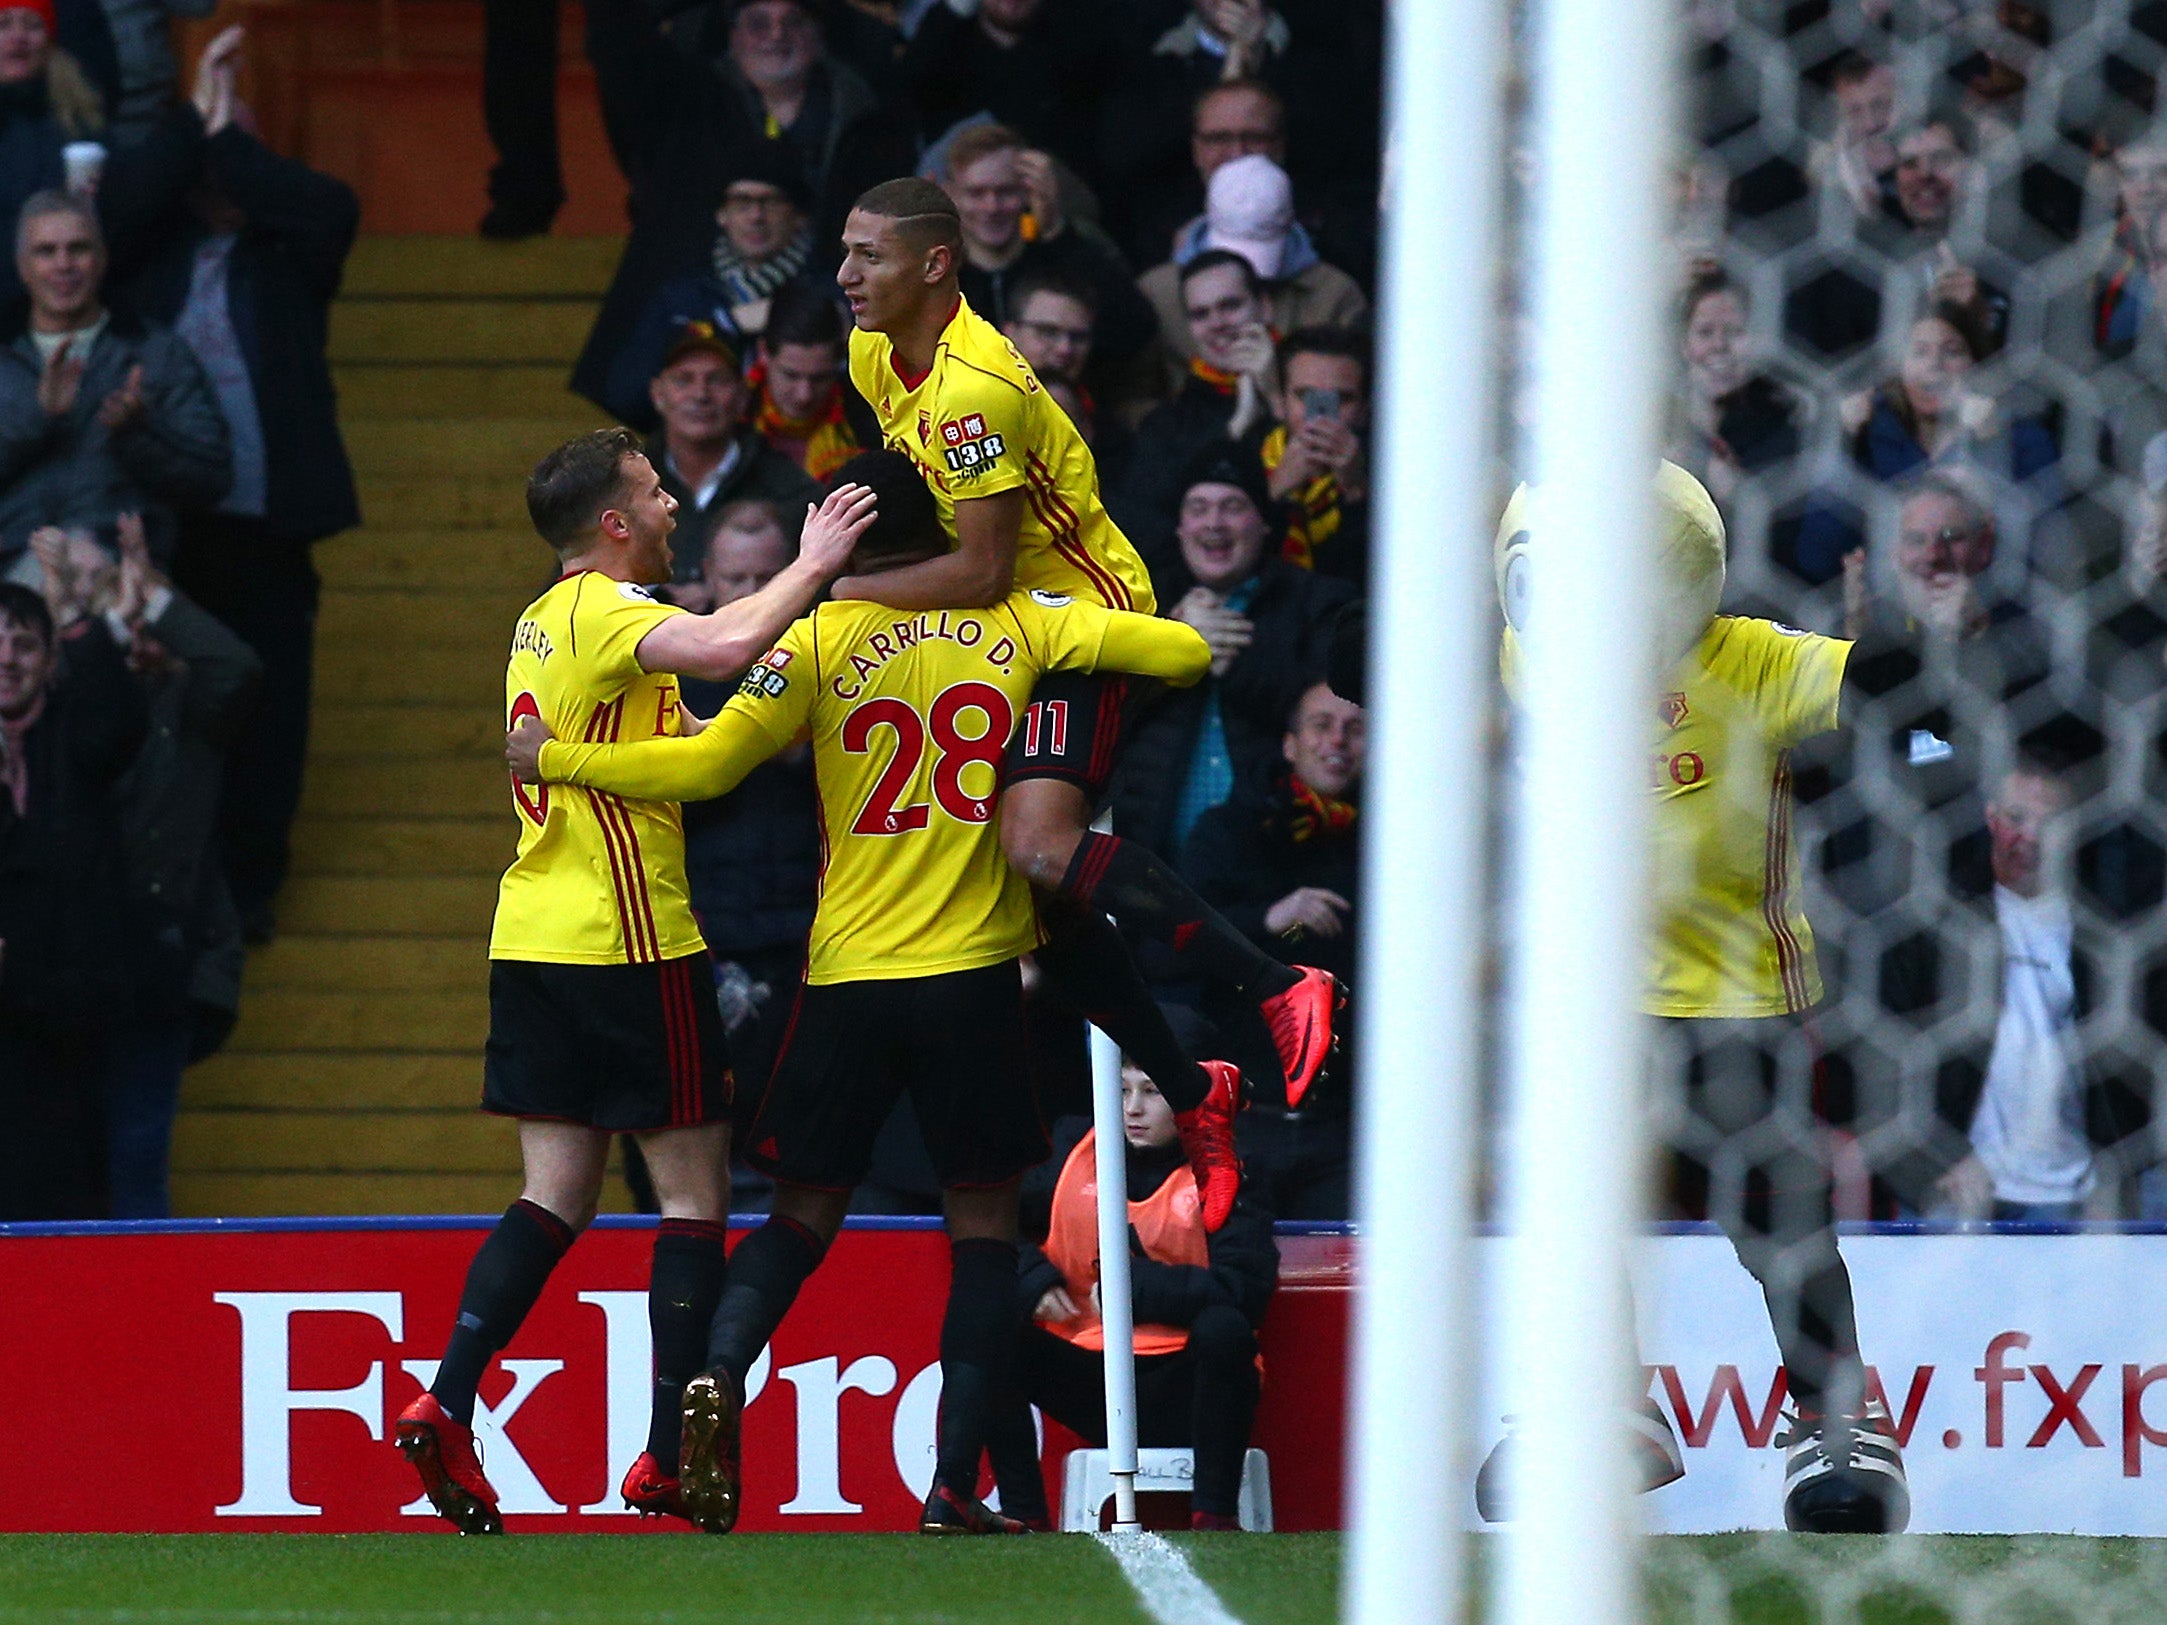 Andre Carrillo gave Watford the lead against basement side Swansea